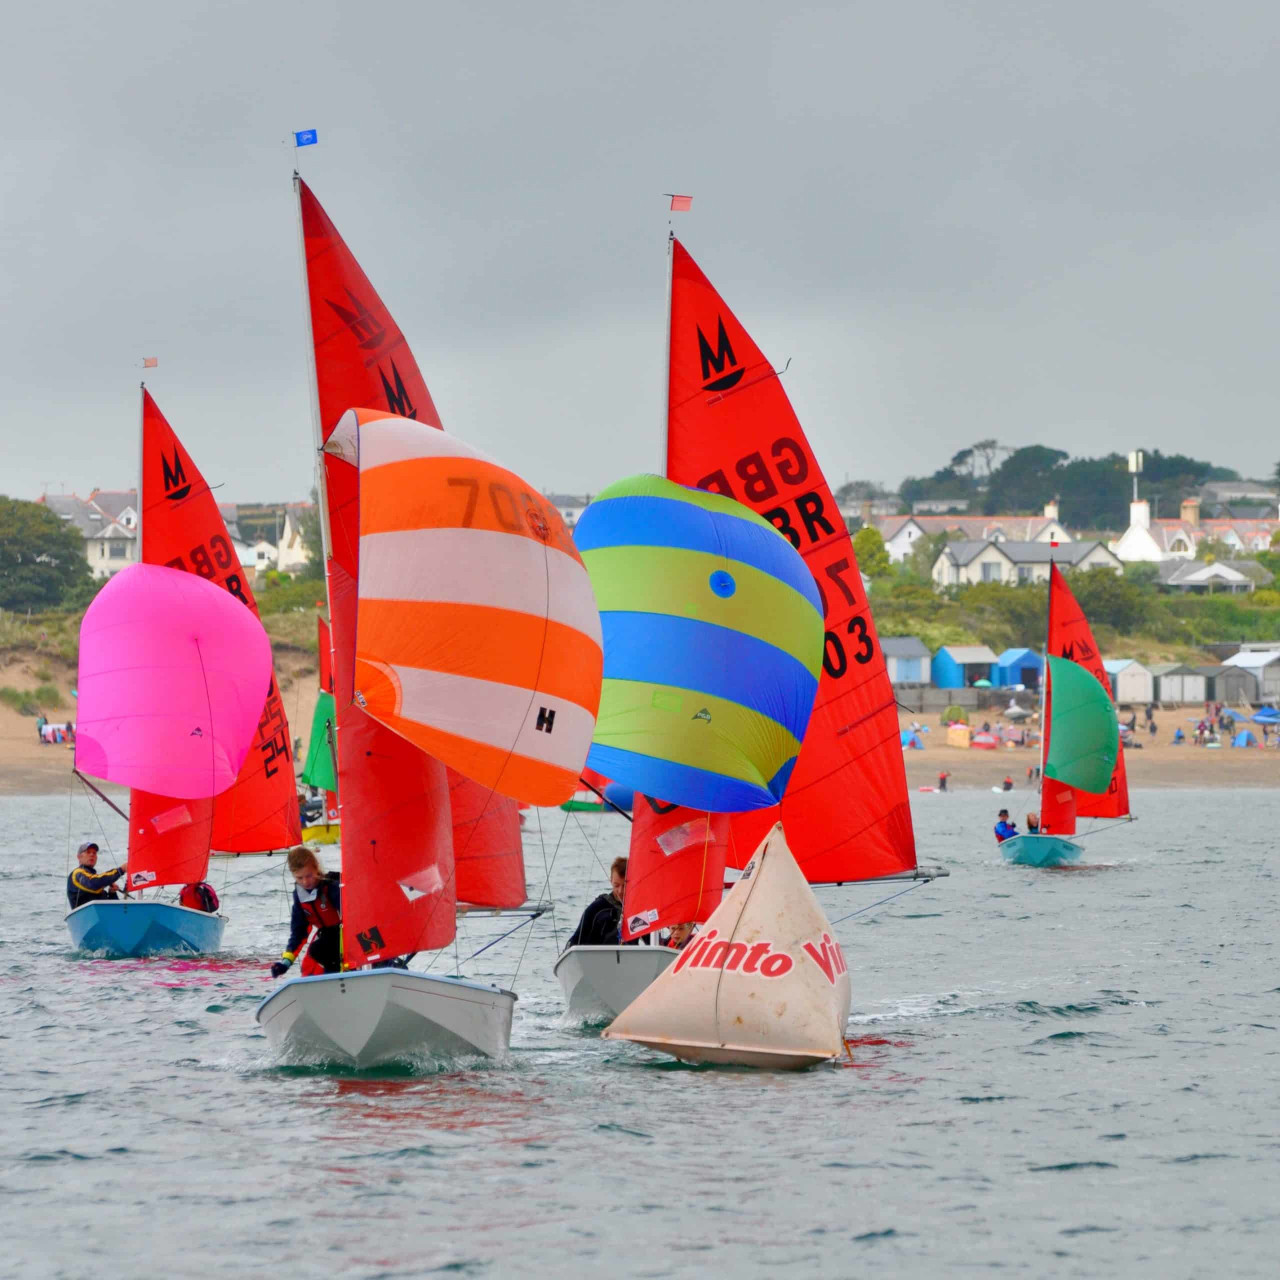 A fleet of Mirror dinghies racing downwind with spinnakers set towards a race mark in the foreground